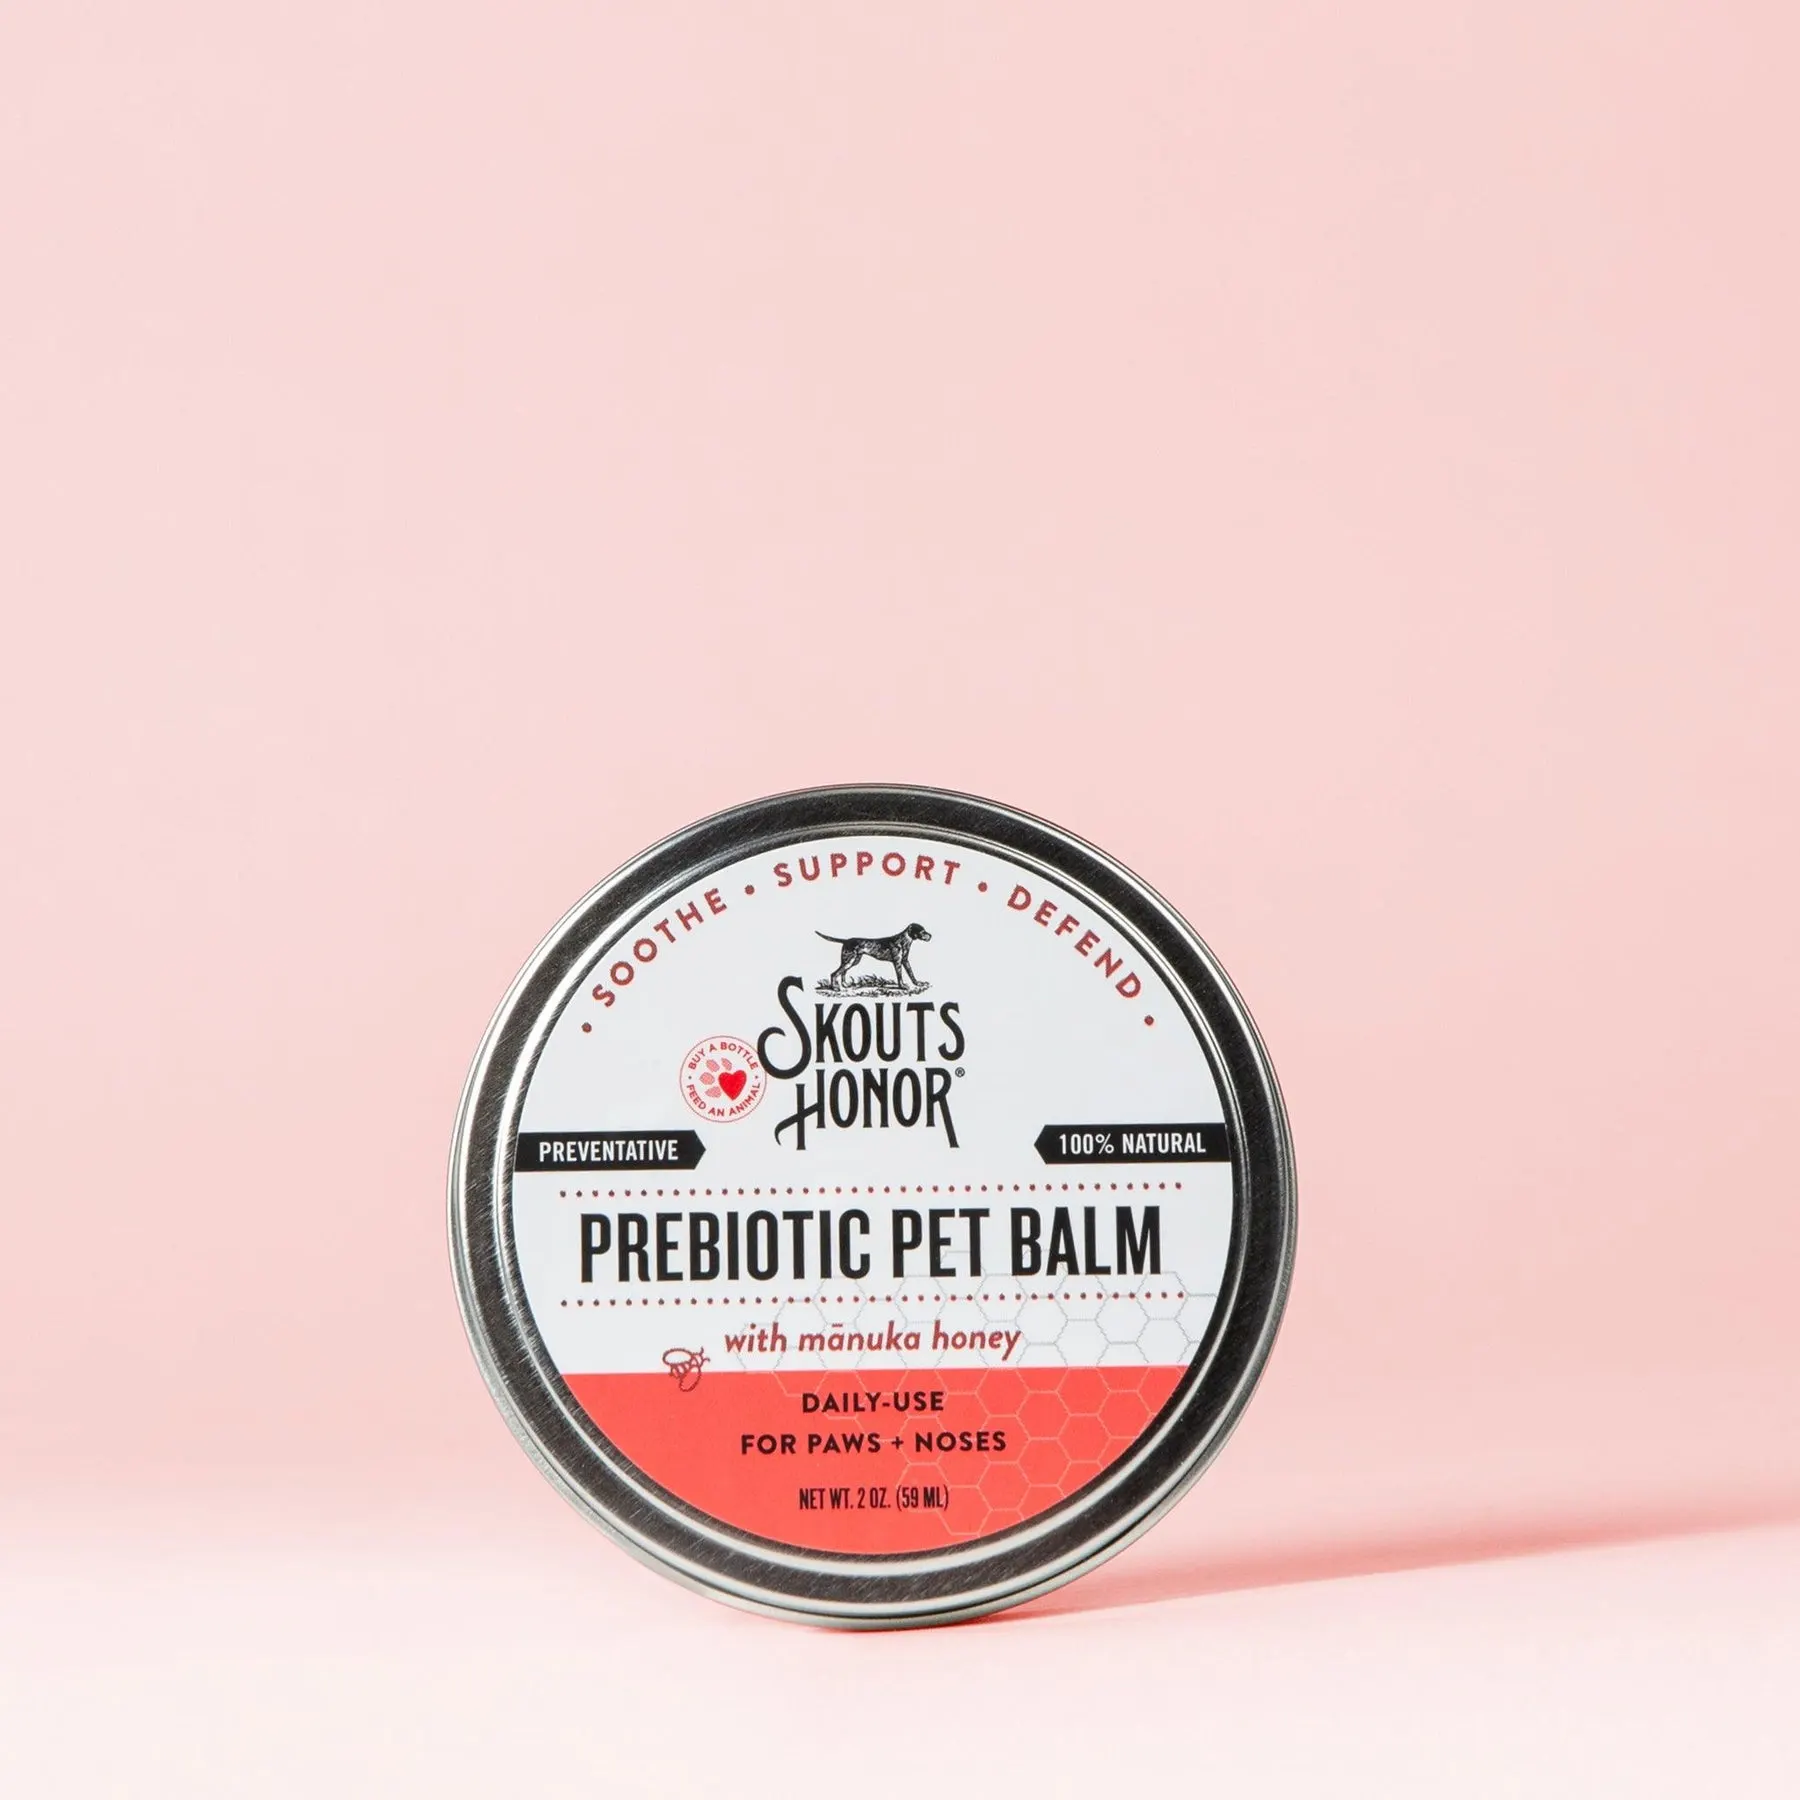 PREBIOTIC PET BALM FOR DOGS & CATS